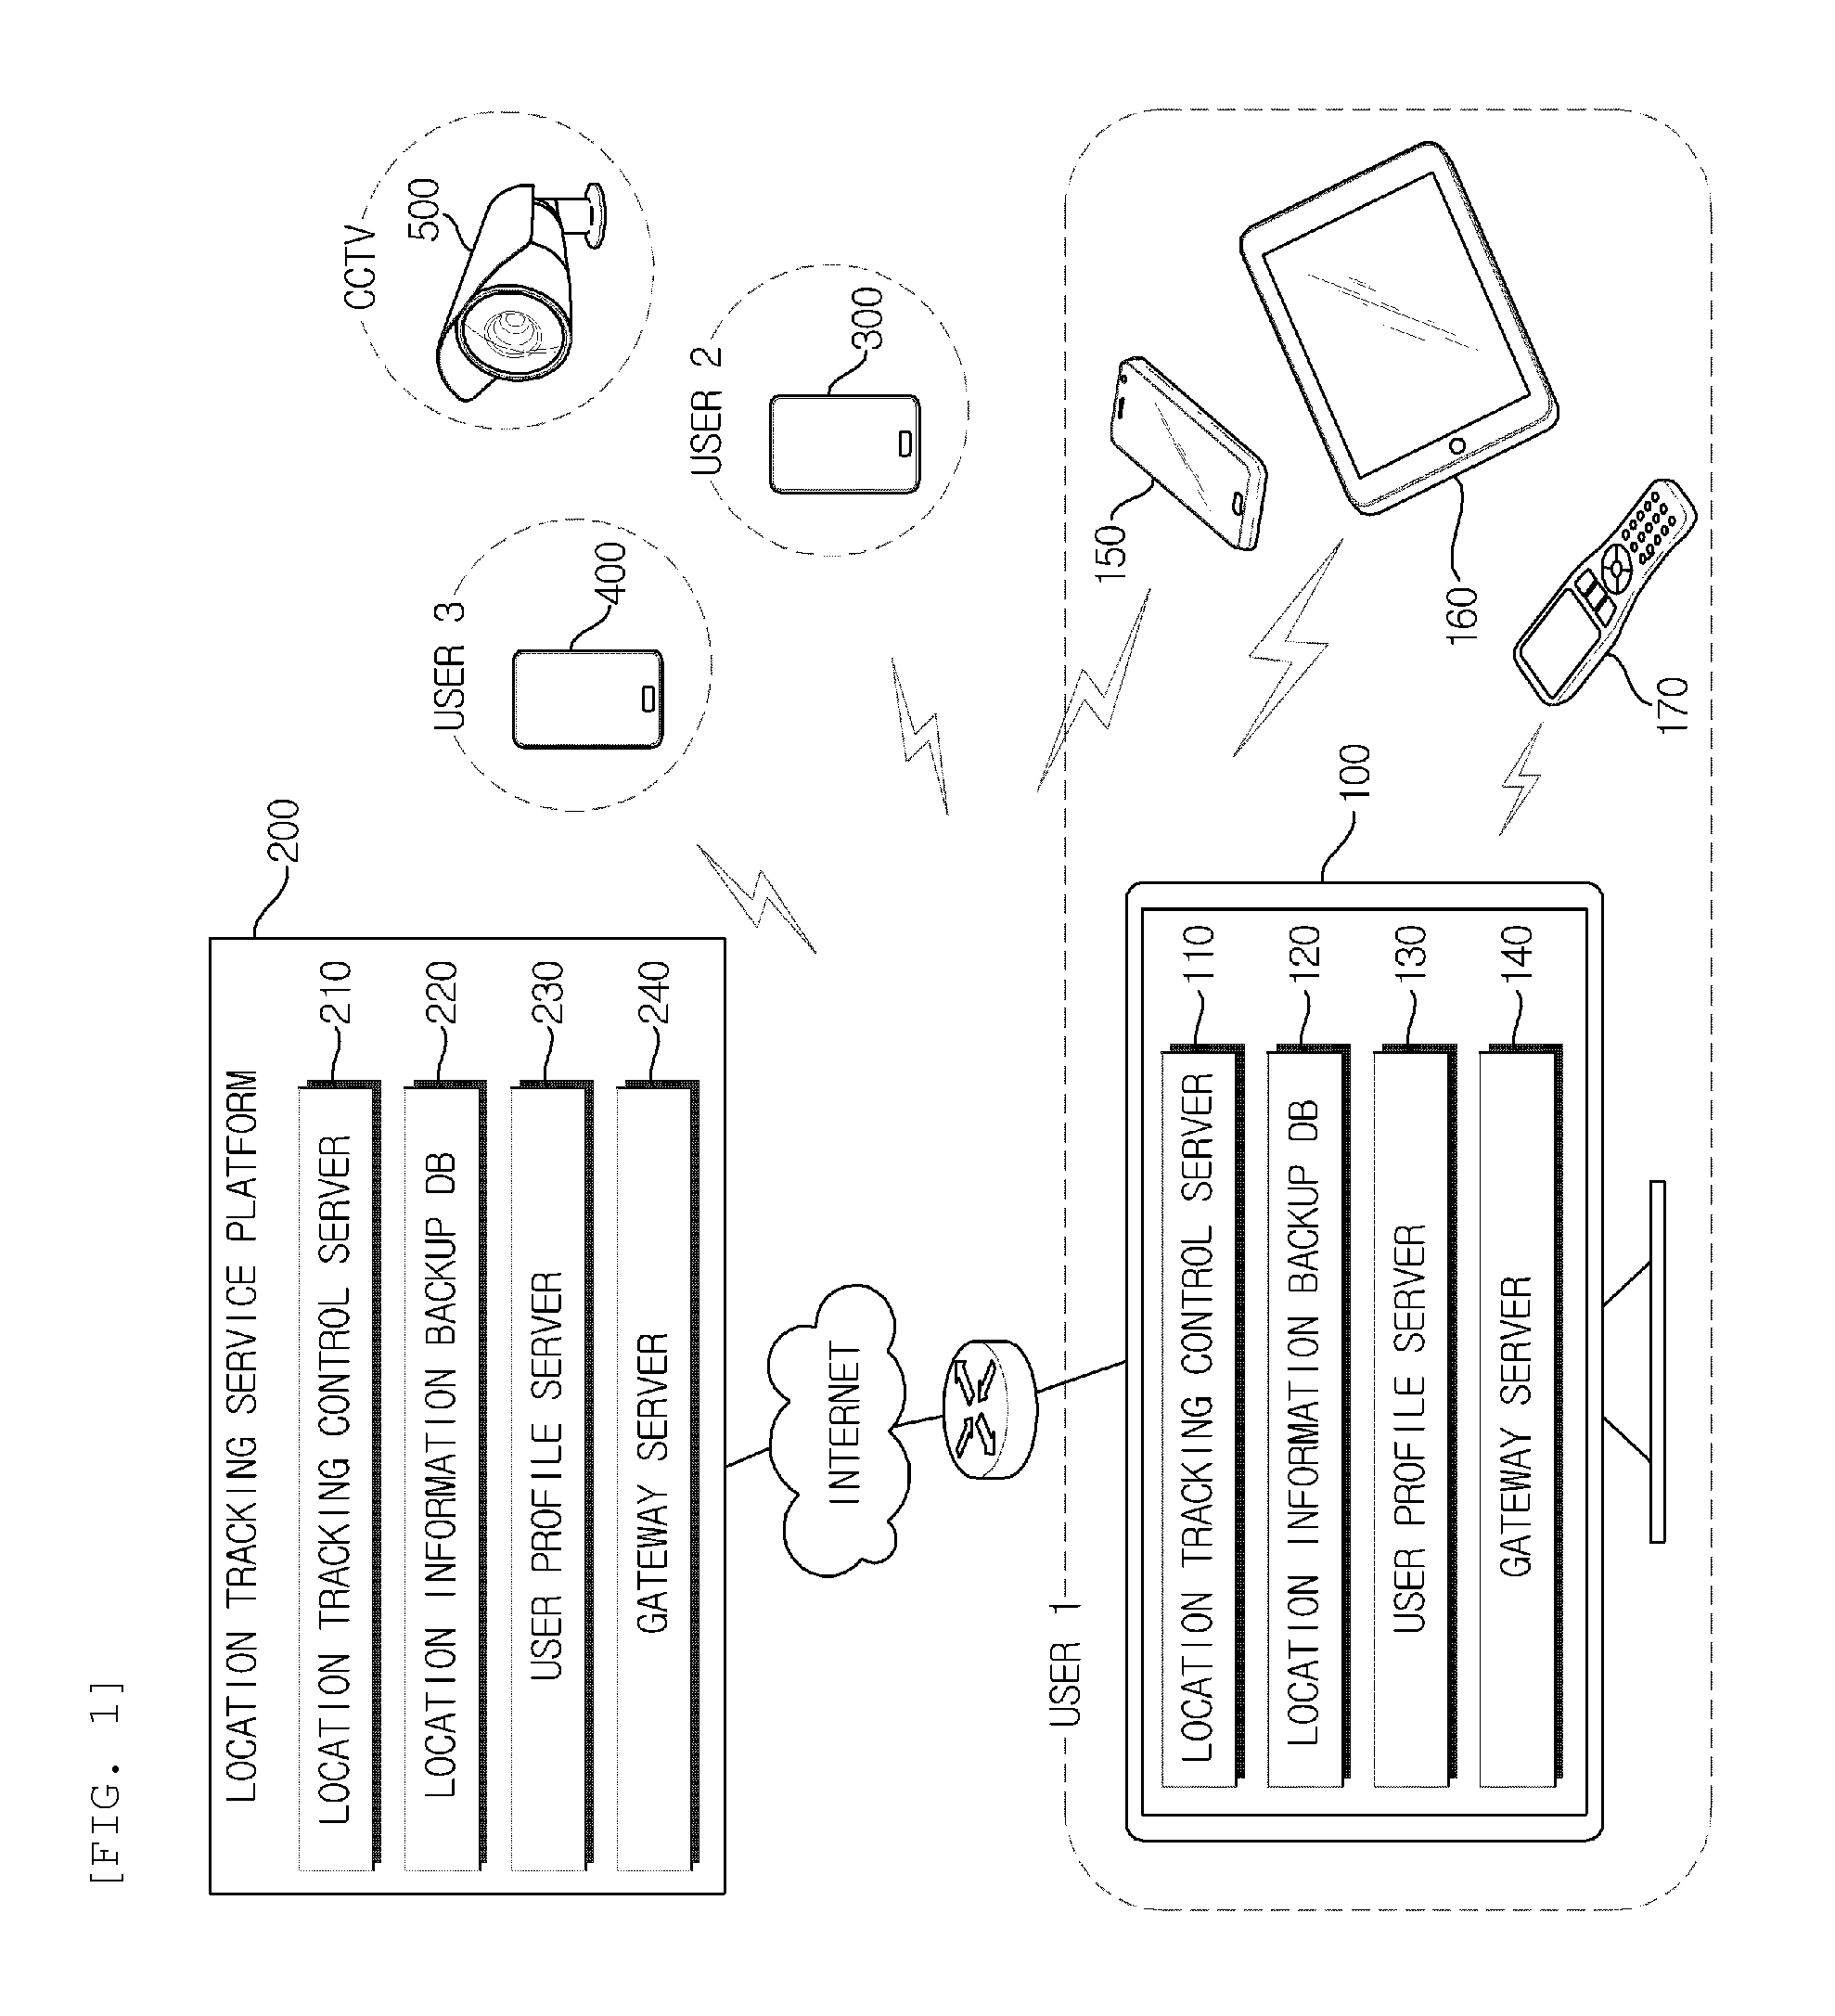 System and method for tracking location of mobile terminal using TV